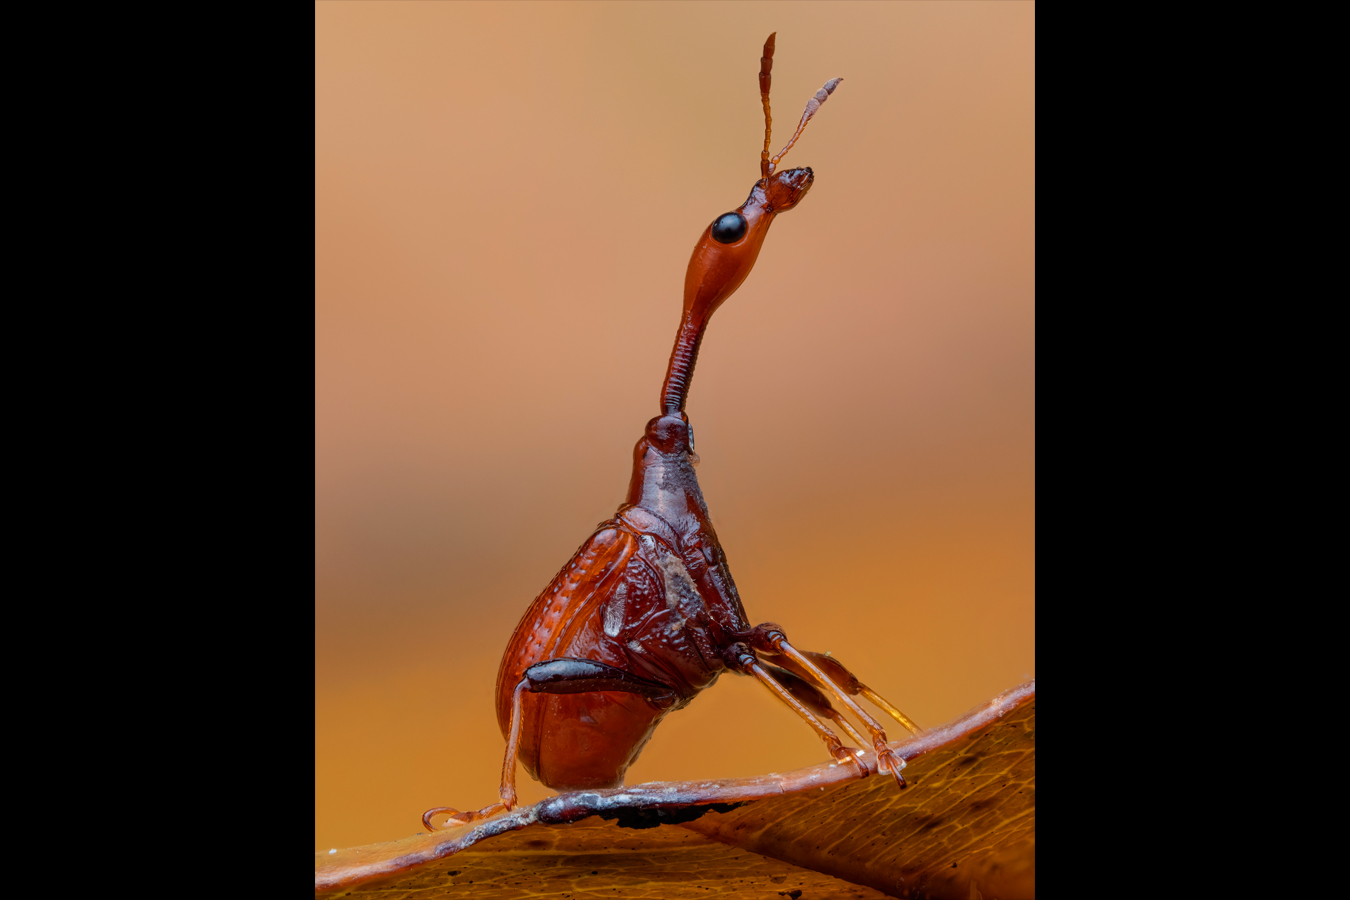 A giraffe weevil sits delicately on a leaf in Malaysia. Photo: Jamie Thorpe, participant in Invertebrates category.  ​​📷 A giraffe weevil sits on a leaf in Malaysia⁣ Category Invertebrates⁣ Jamie Thorpe | cupoty.com⁣